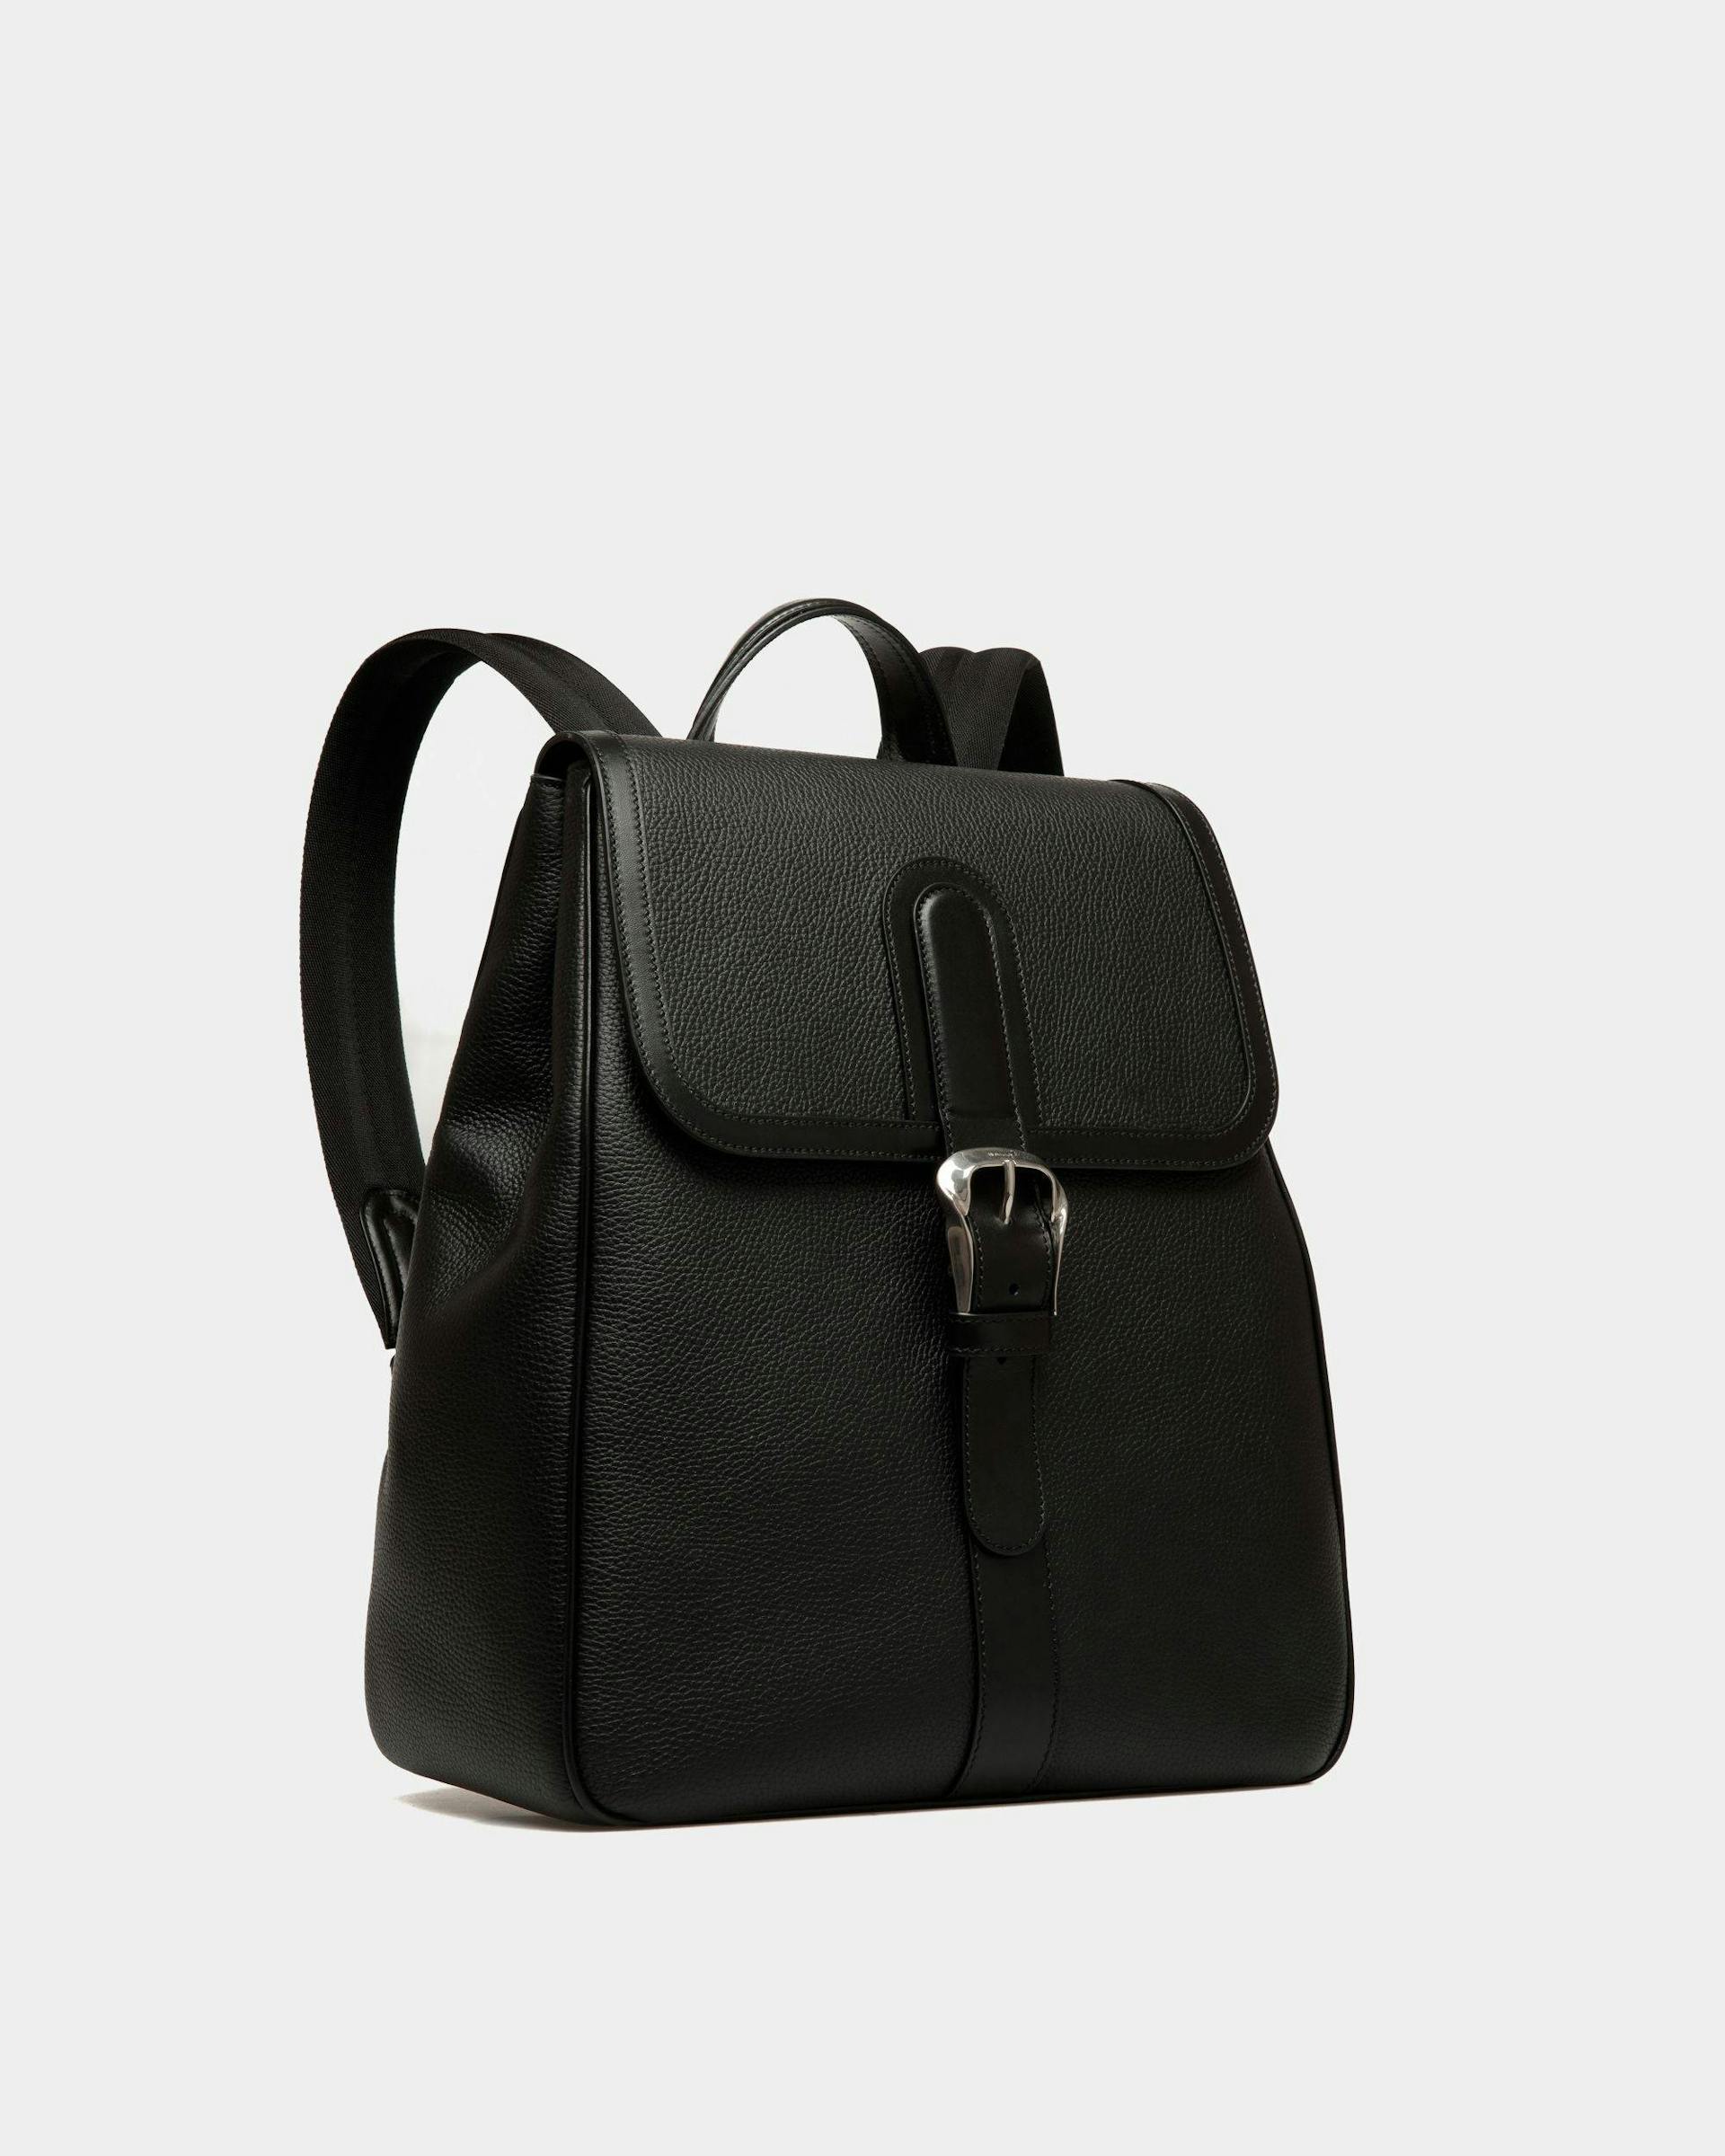 Men's Spin Backpack In Black Grained Leather | Bally | Still Life 3/4 Front